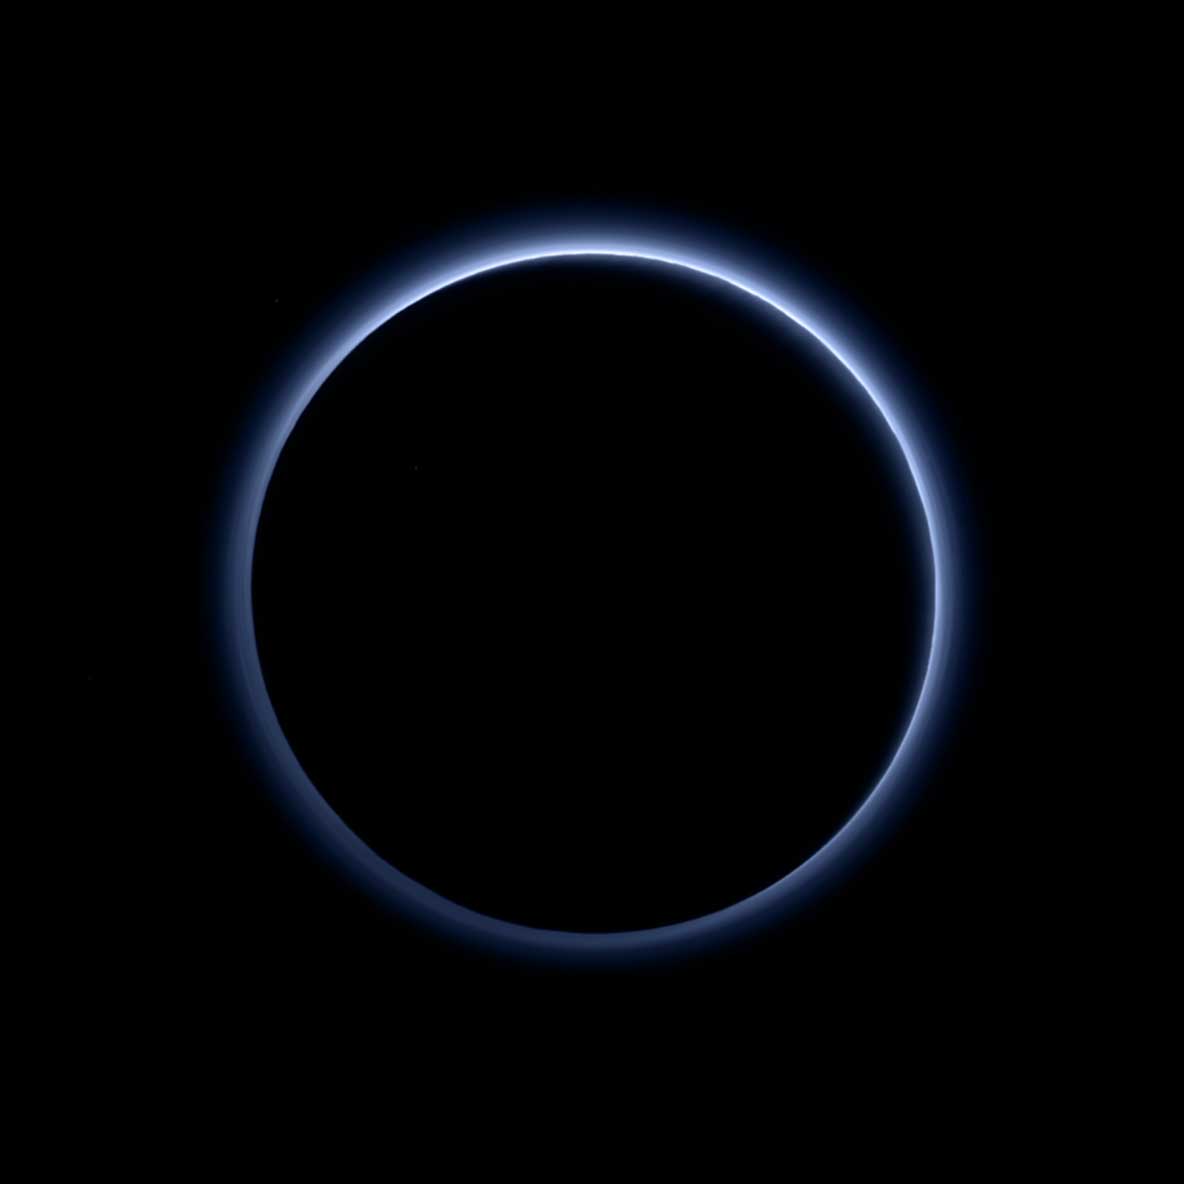 Pluto's haze layer shows its blue color in this picture taken by the New Horizons Ralph/Multispectral Visible Imaging Camera (MVIC). The high-altitude haze is thought to be similar in nature to that seen at Saturn’s moon Titan. The source of both hazes likely involves sunlight-initiated chemical reactions of nitrogen and methane, leading to relatively small, soot-like particles (called tholins) that grow as they settle toward the surface. This image was generated by software that combines information from blue, red and near-infrared images to replicate the color a human eye would perceive as closely as possible.More: New Horizons Finds Blue Skies and Water Ice on PlutoImage Credit: NASA/JHUAPL/SwRILast Updated: Oct. 8, 2015Editor: Sarah Loff